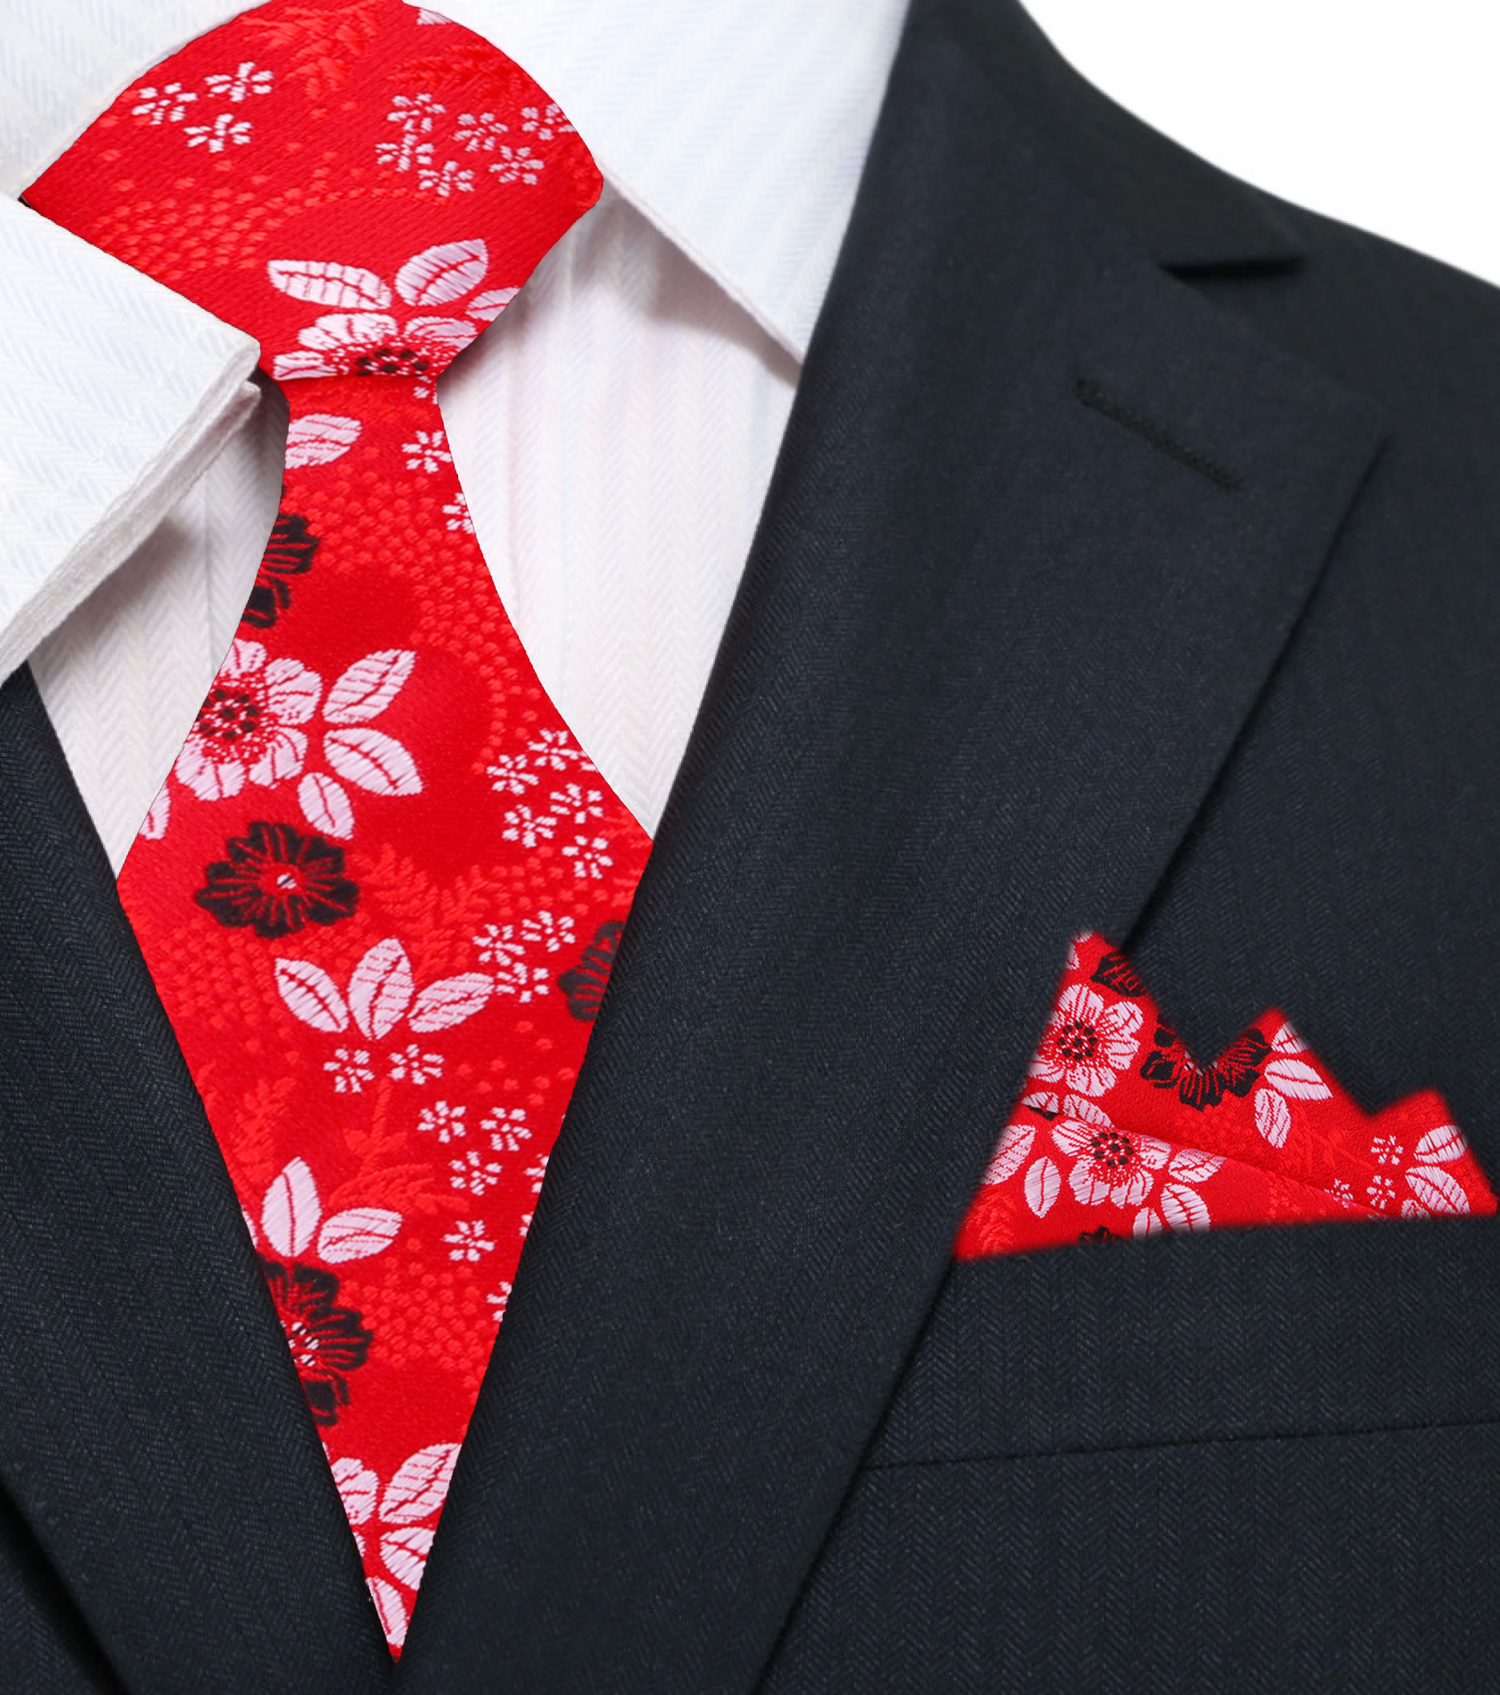 Main: A Red, Dark Red And White Floral Pattern Necktie With Matching Pocket Square